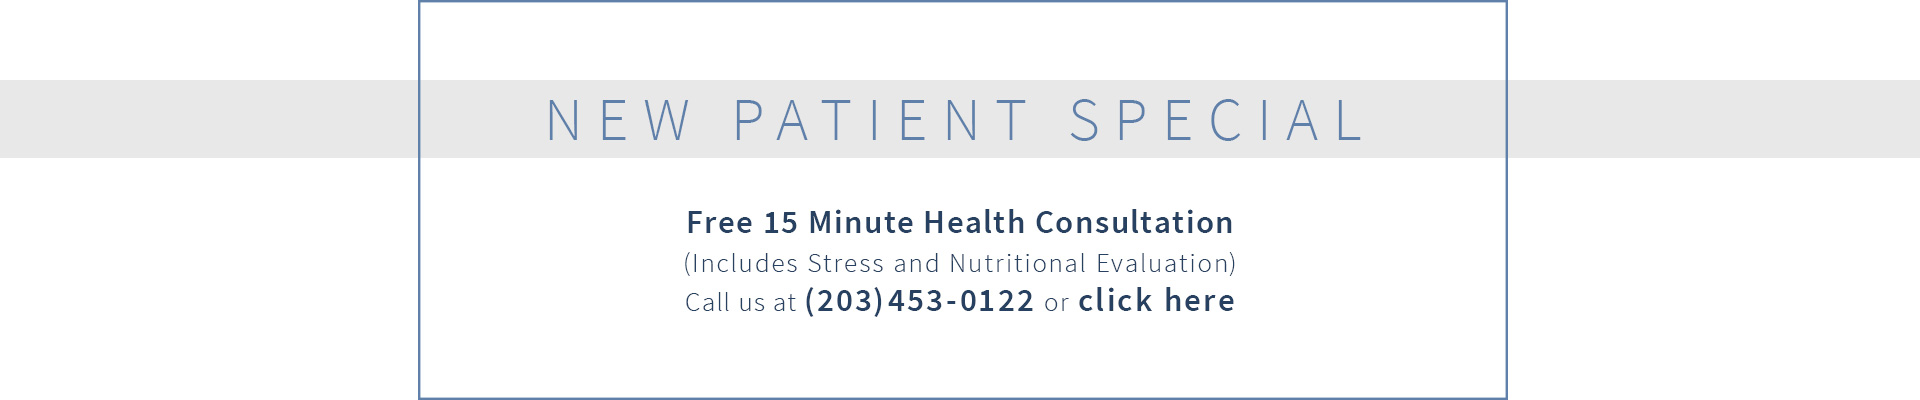 Dr Fisel, ND, offers a free 15 minute naturopathic health consultation